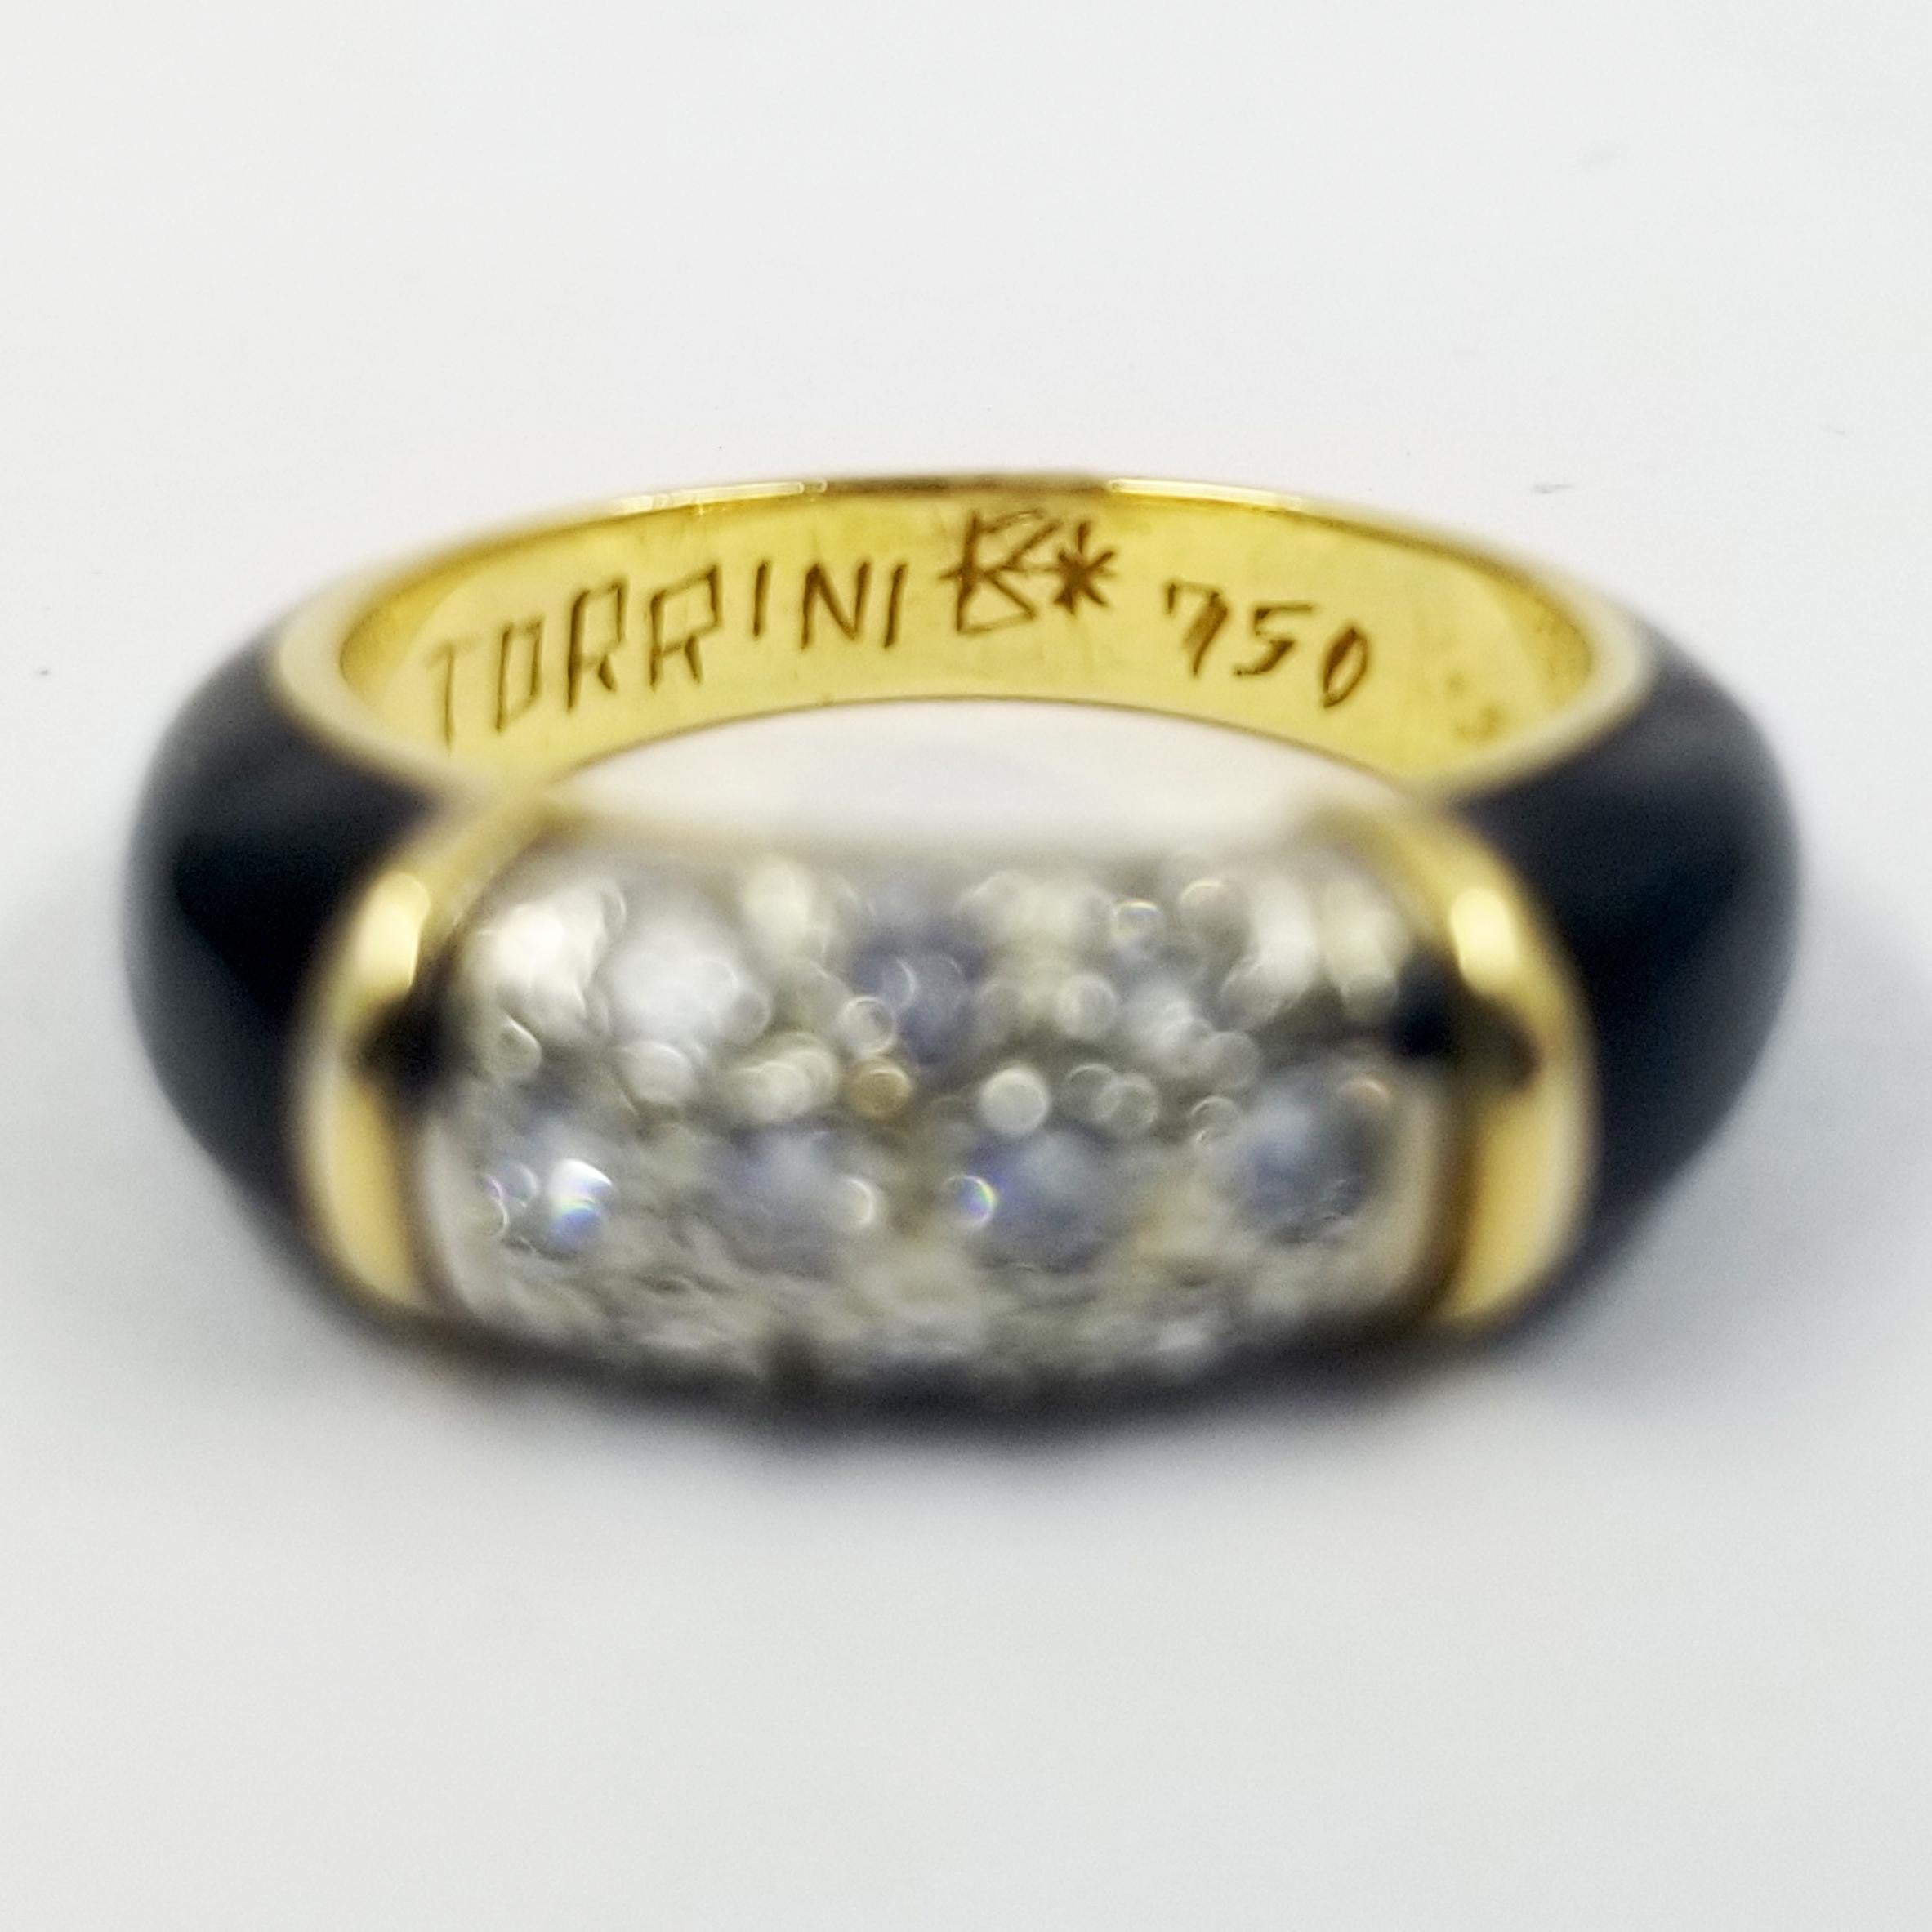 18 Karat Yellow Gold and Black Enamel Ring by Torrini, Featuring 10 Round Diamonds Totaling Approximately 0.50 Carats of VS Clarity & G Color. Finger Size 4.5, Cannot Be Sized.